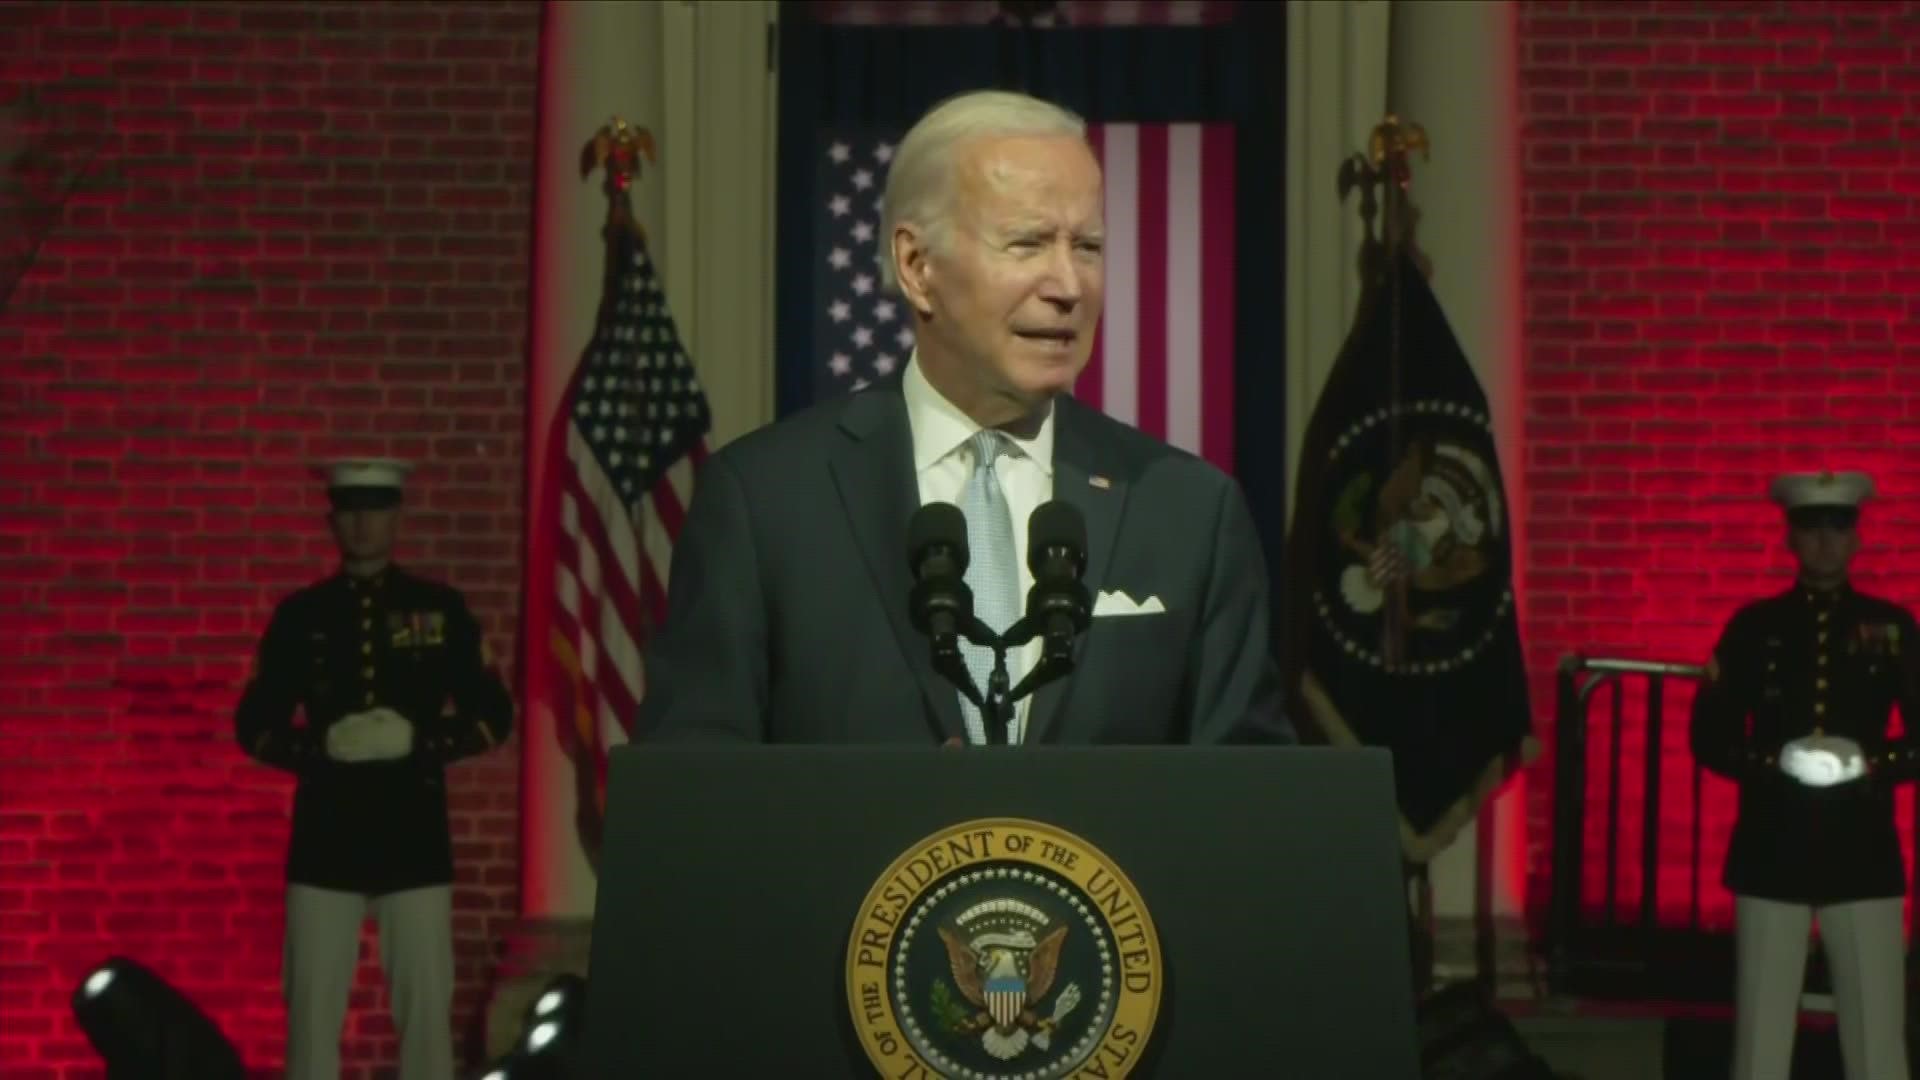 In a primetime address, President Biden spoke against extremism and political violence, which he says are encouraged by MAGA Republicans.